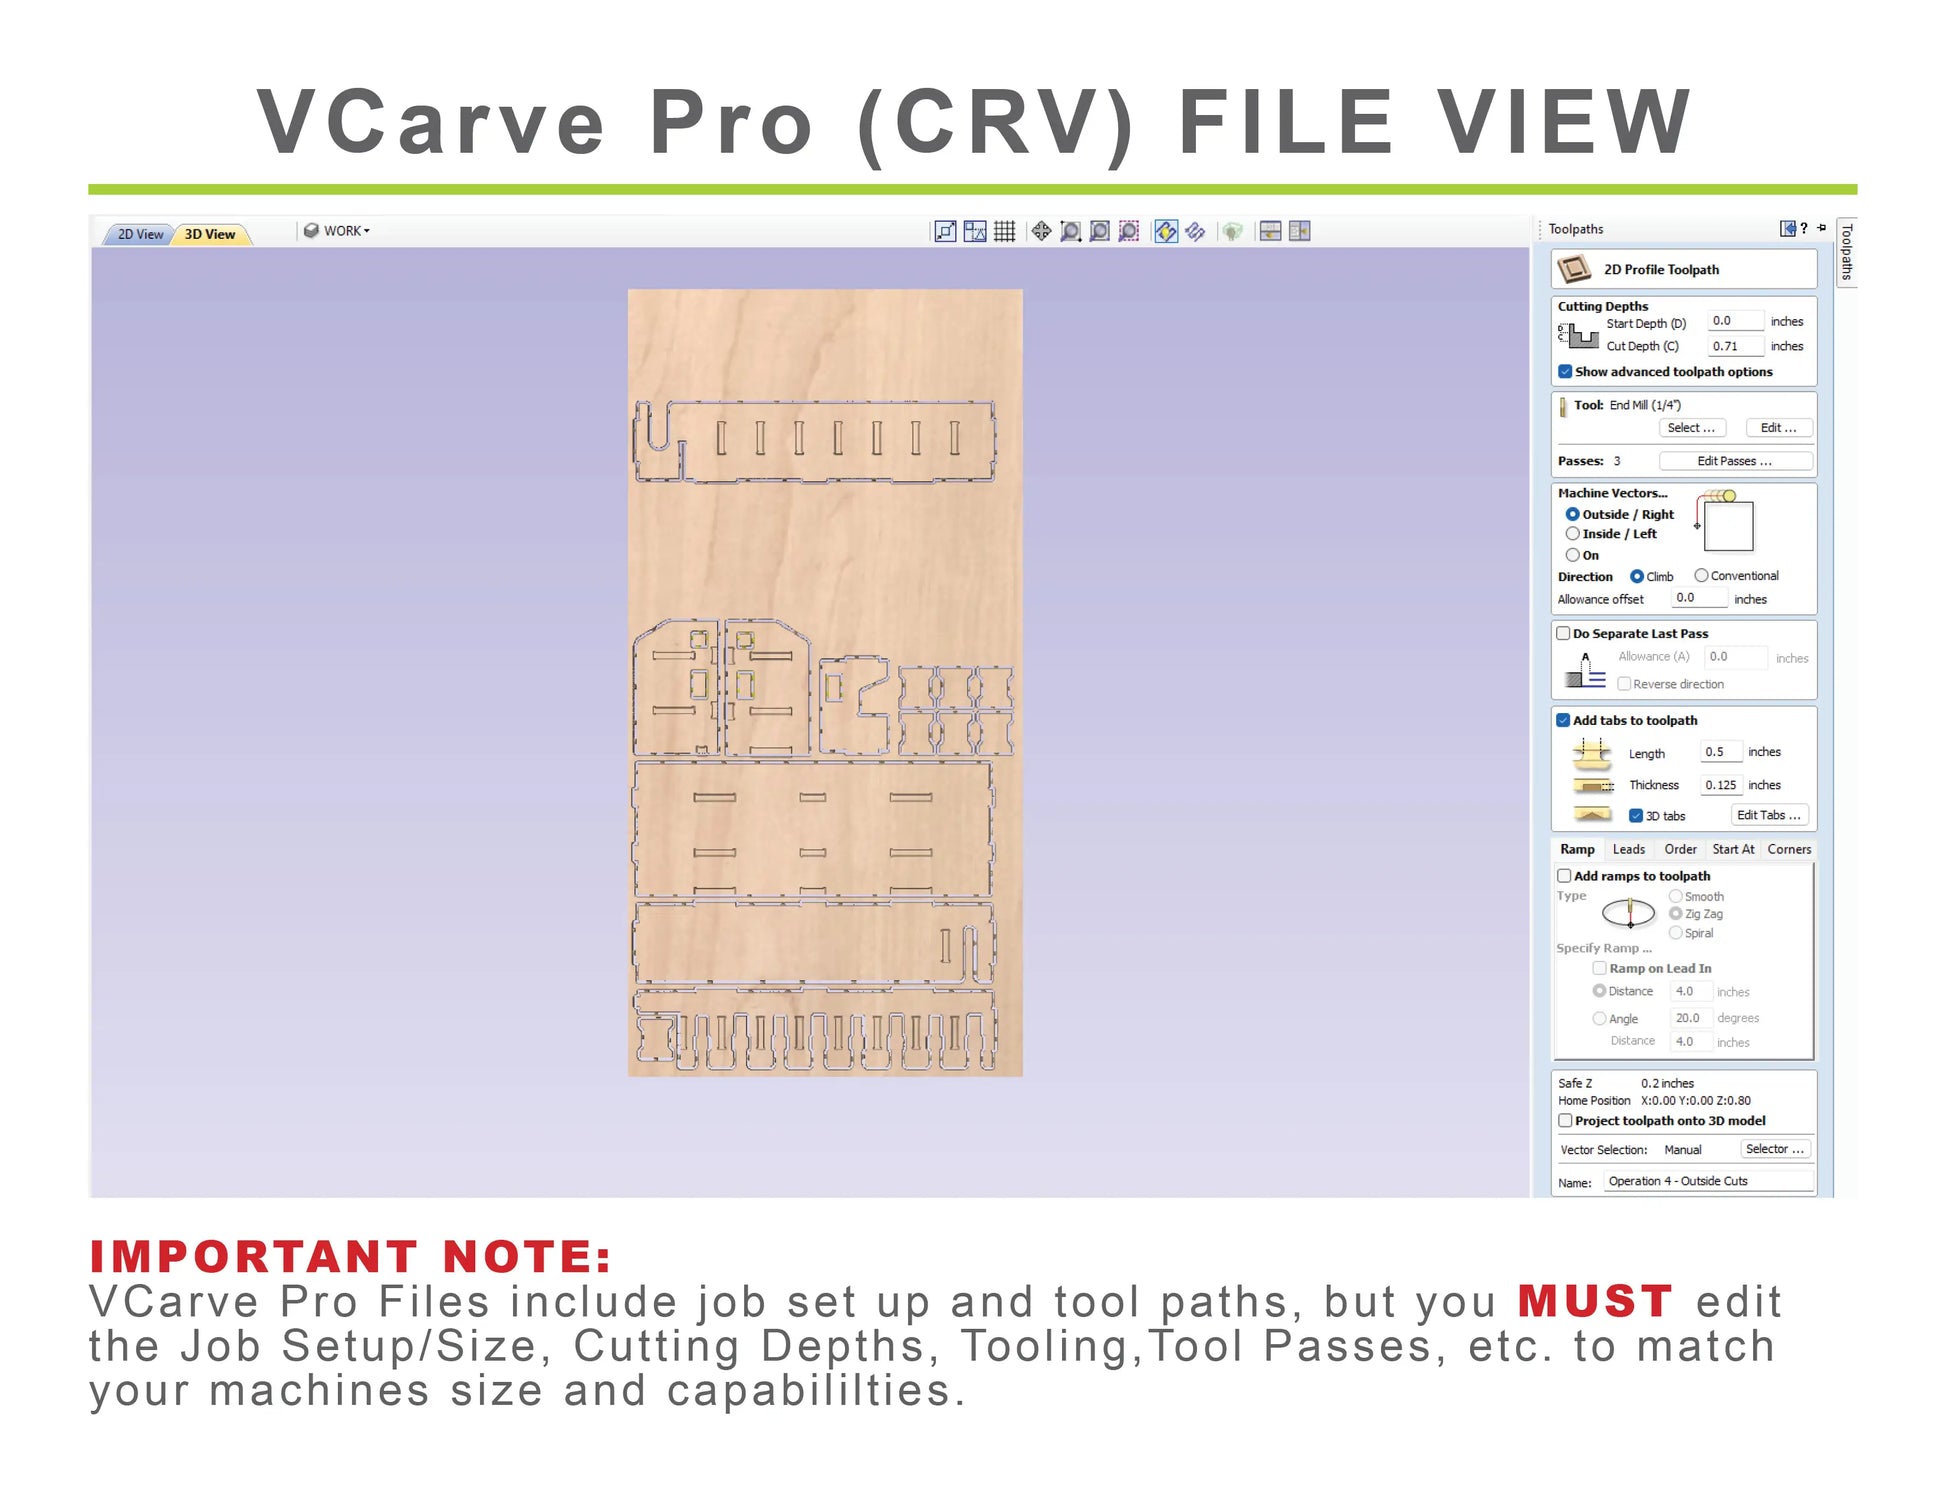 vectric vcarve pro crv files of a drill holder charging station cabinet made from plywood with toolpaths